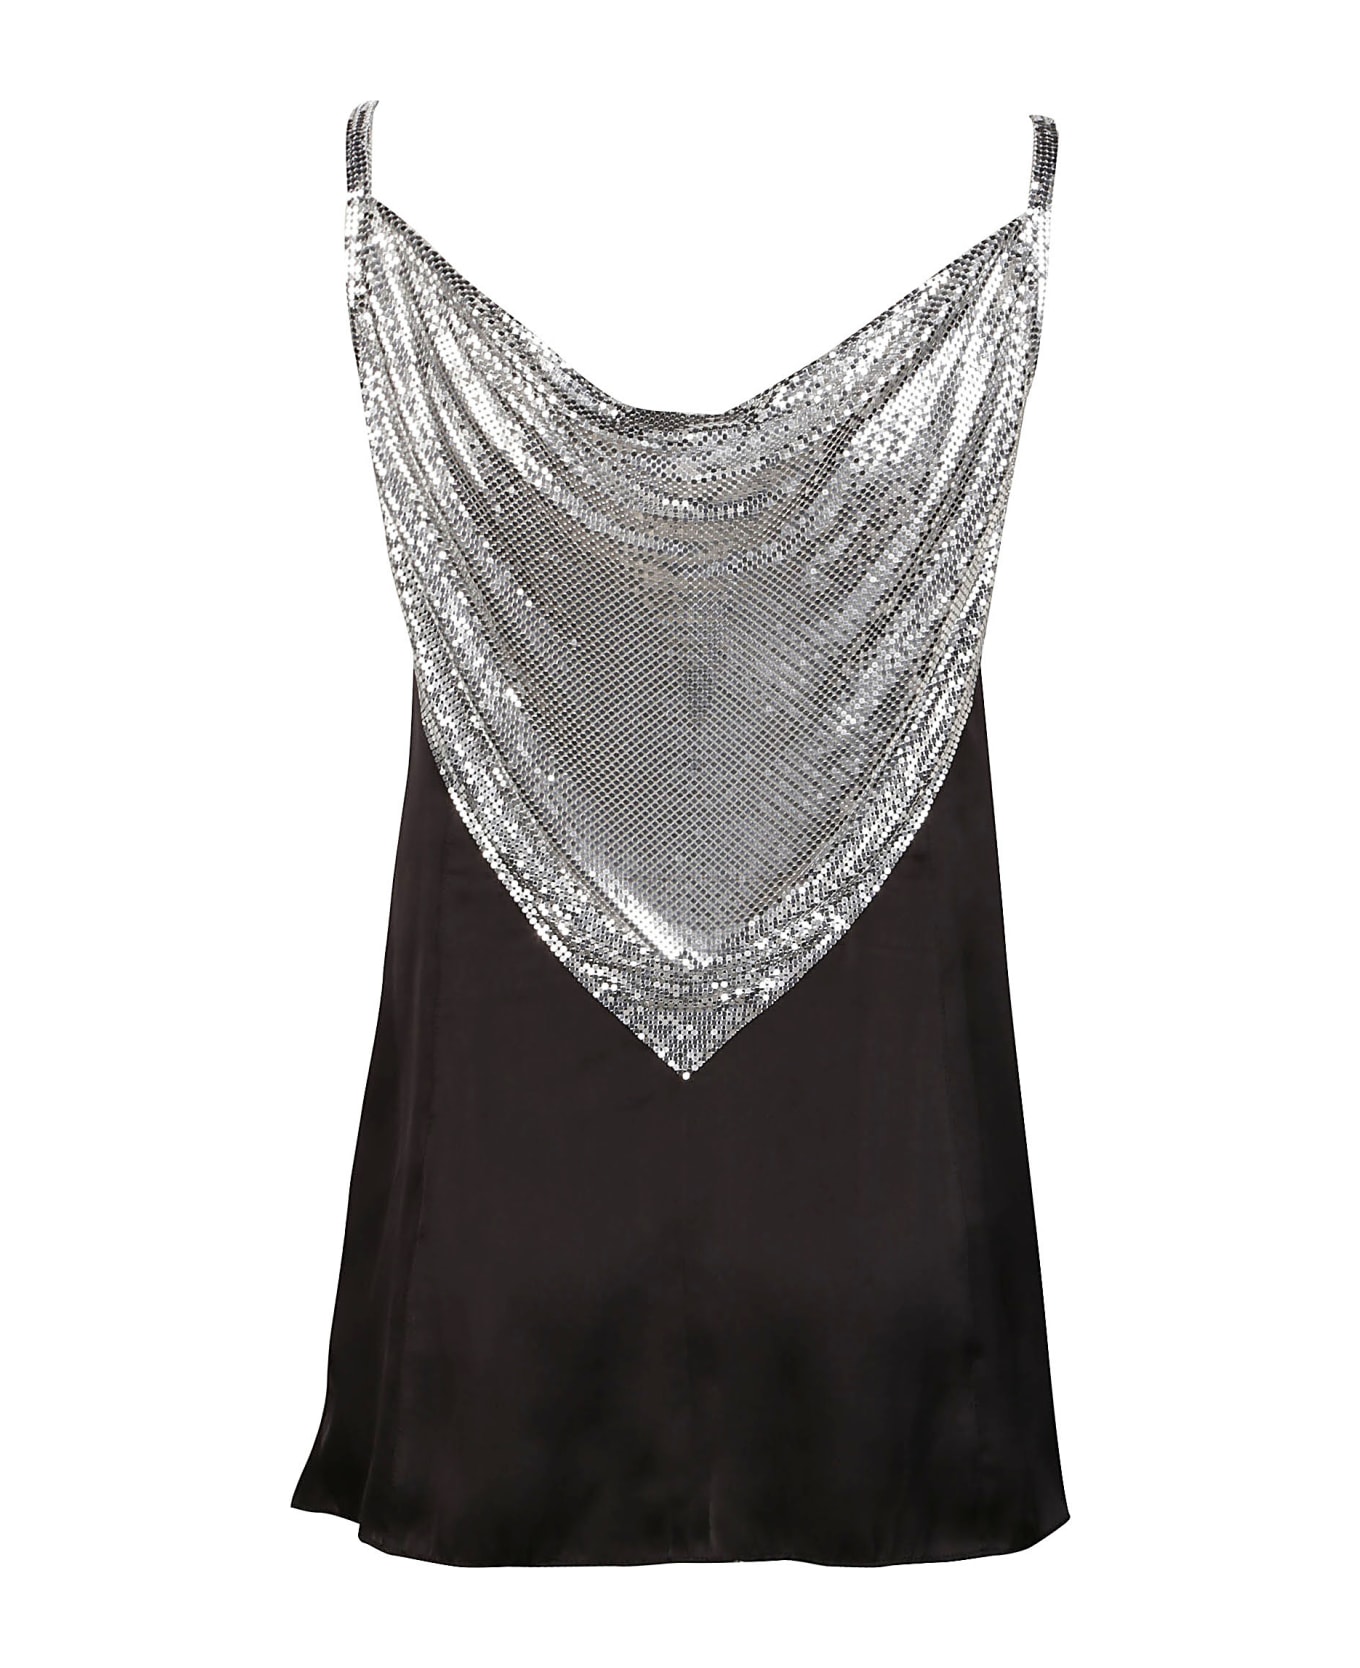 Paco Rabanne Tank Top - Black/silver トップス